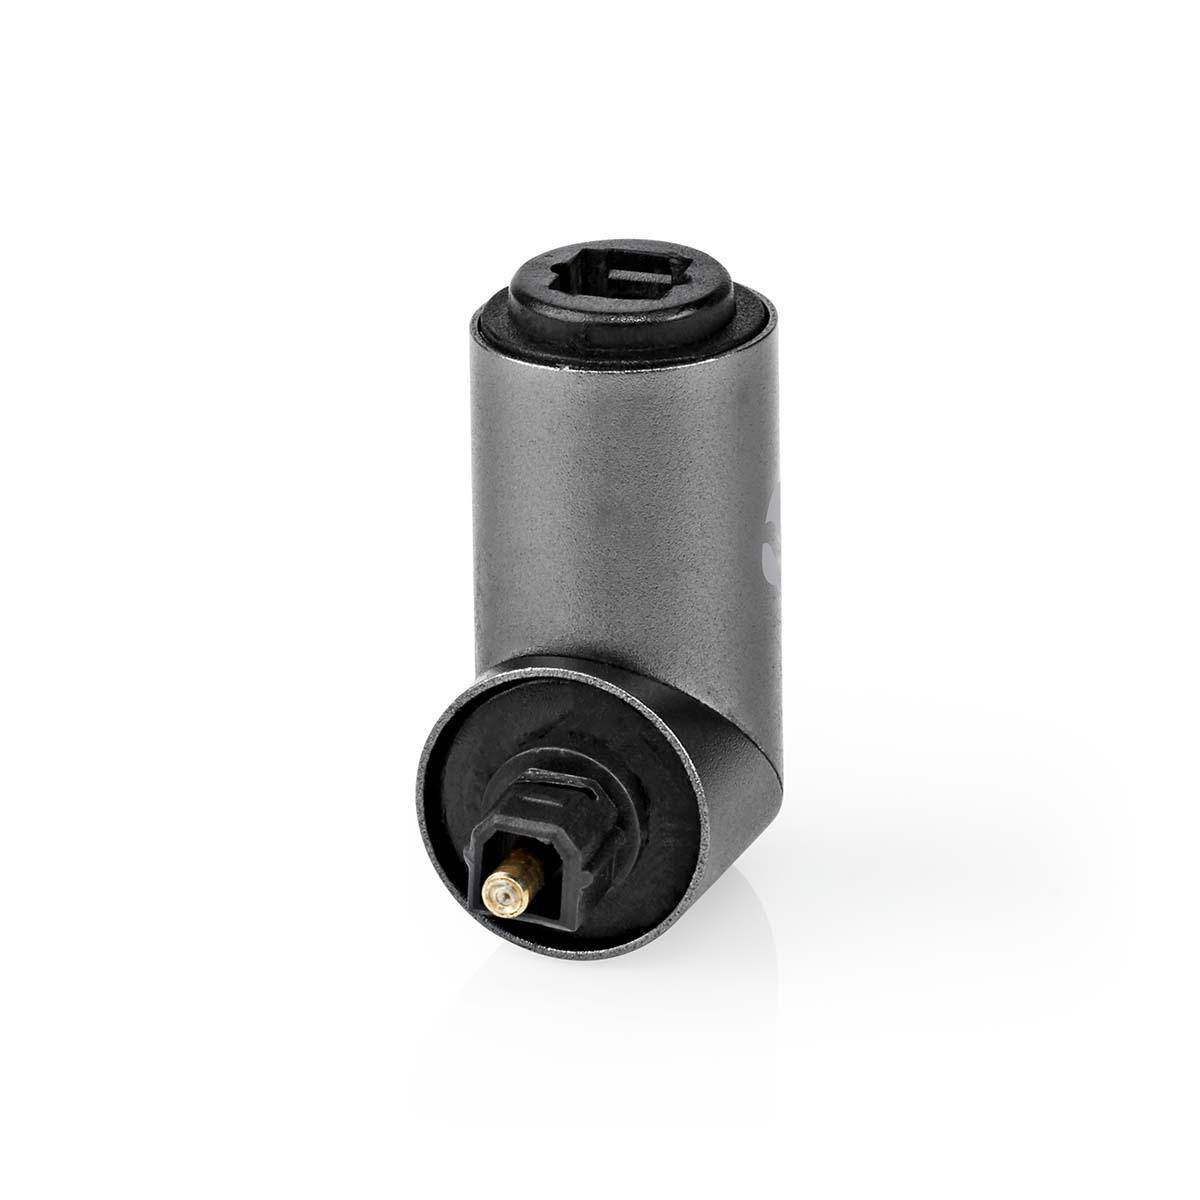 Adapter Toslink NEDIS CATB25920GY